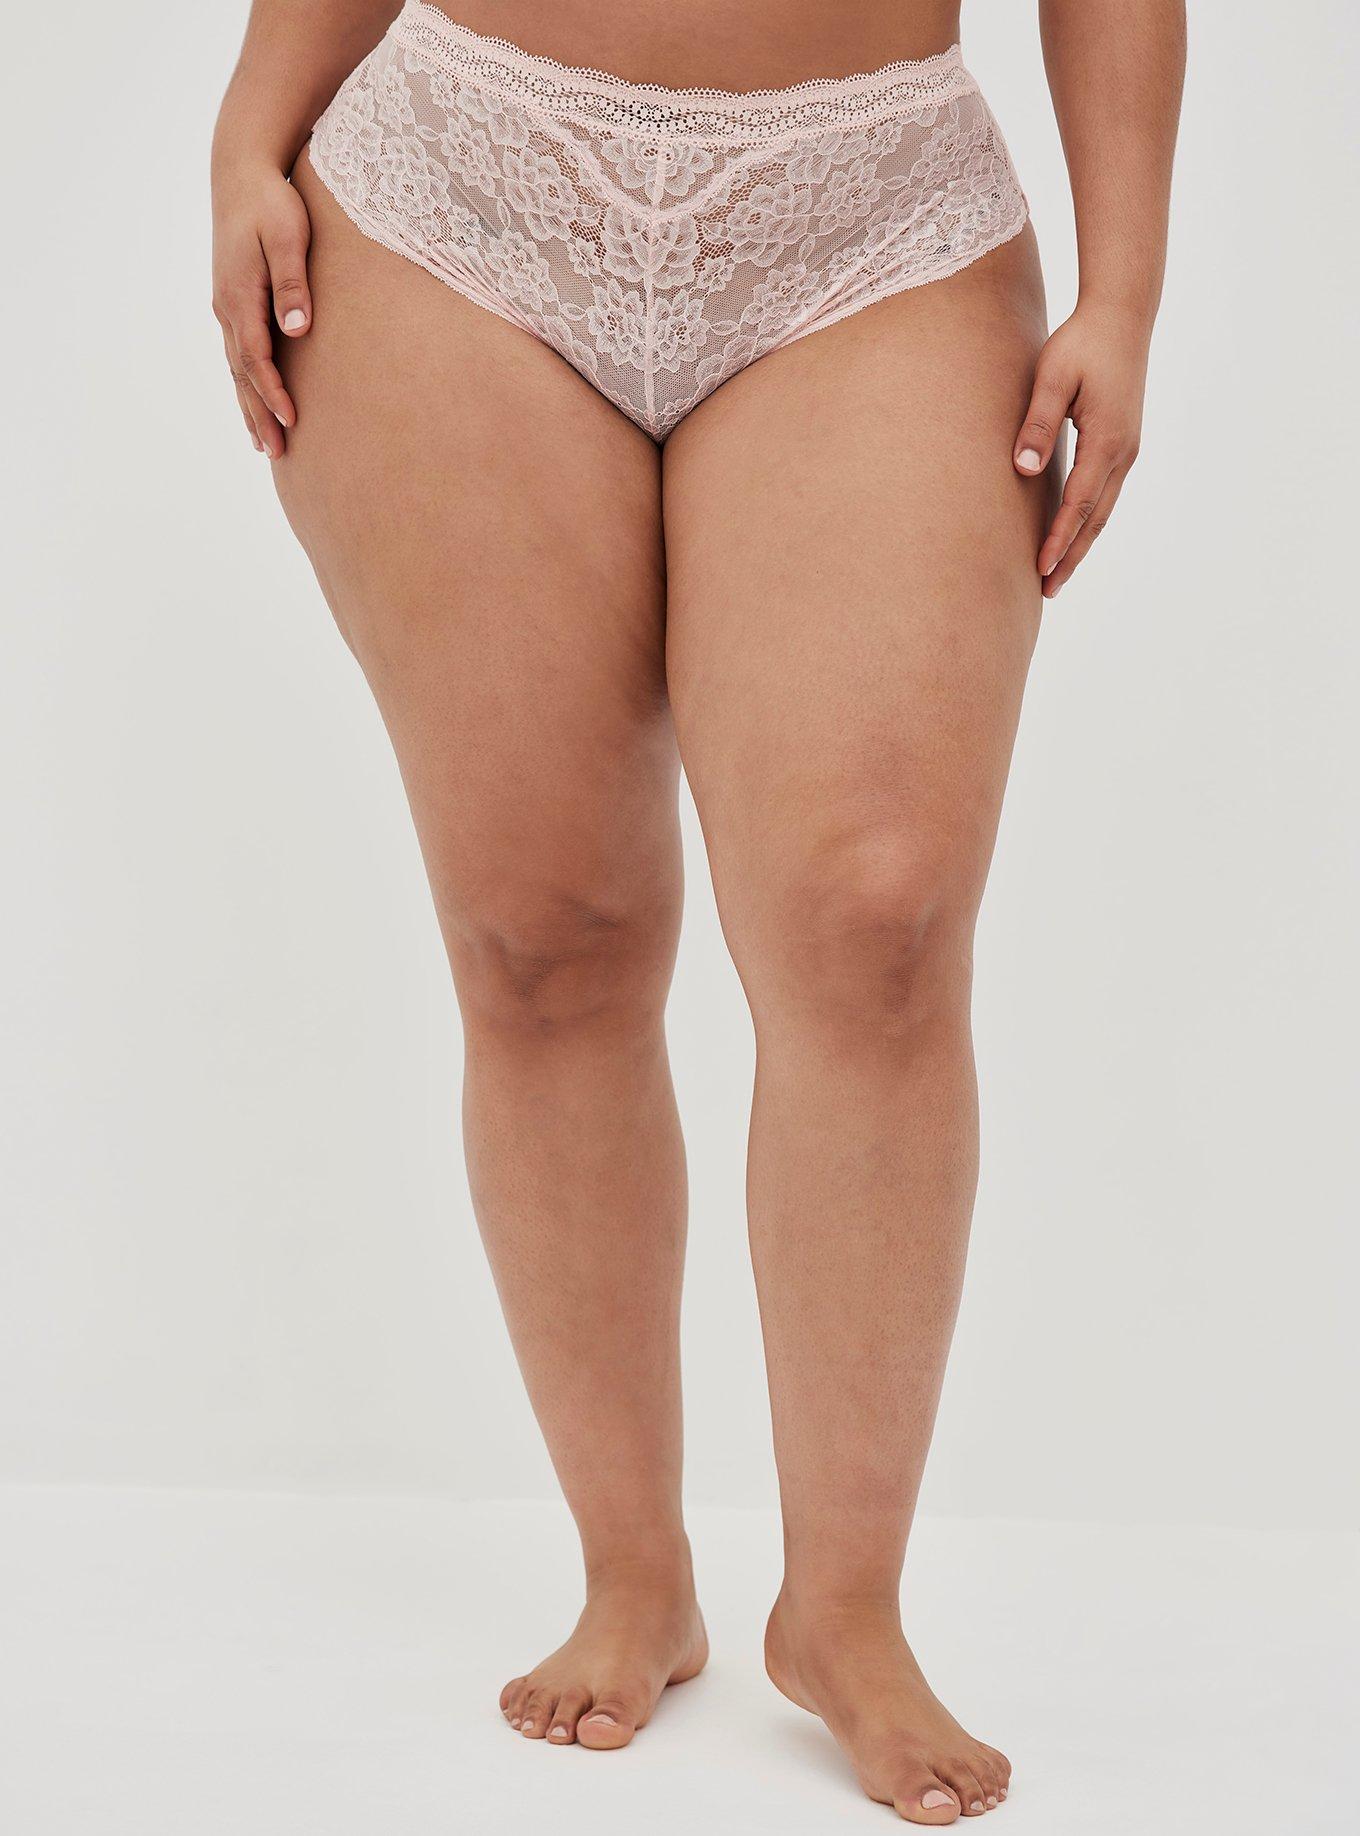 Plus Size - Floral Lace Strappy Mid Rise Cheeky Panty - Torrid